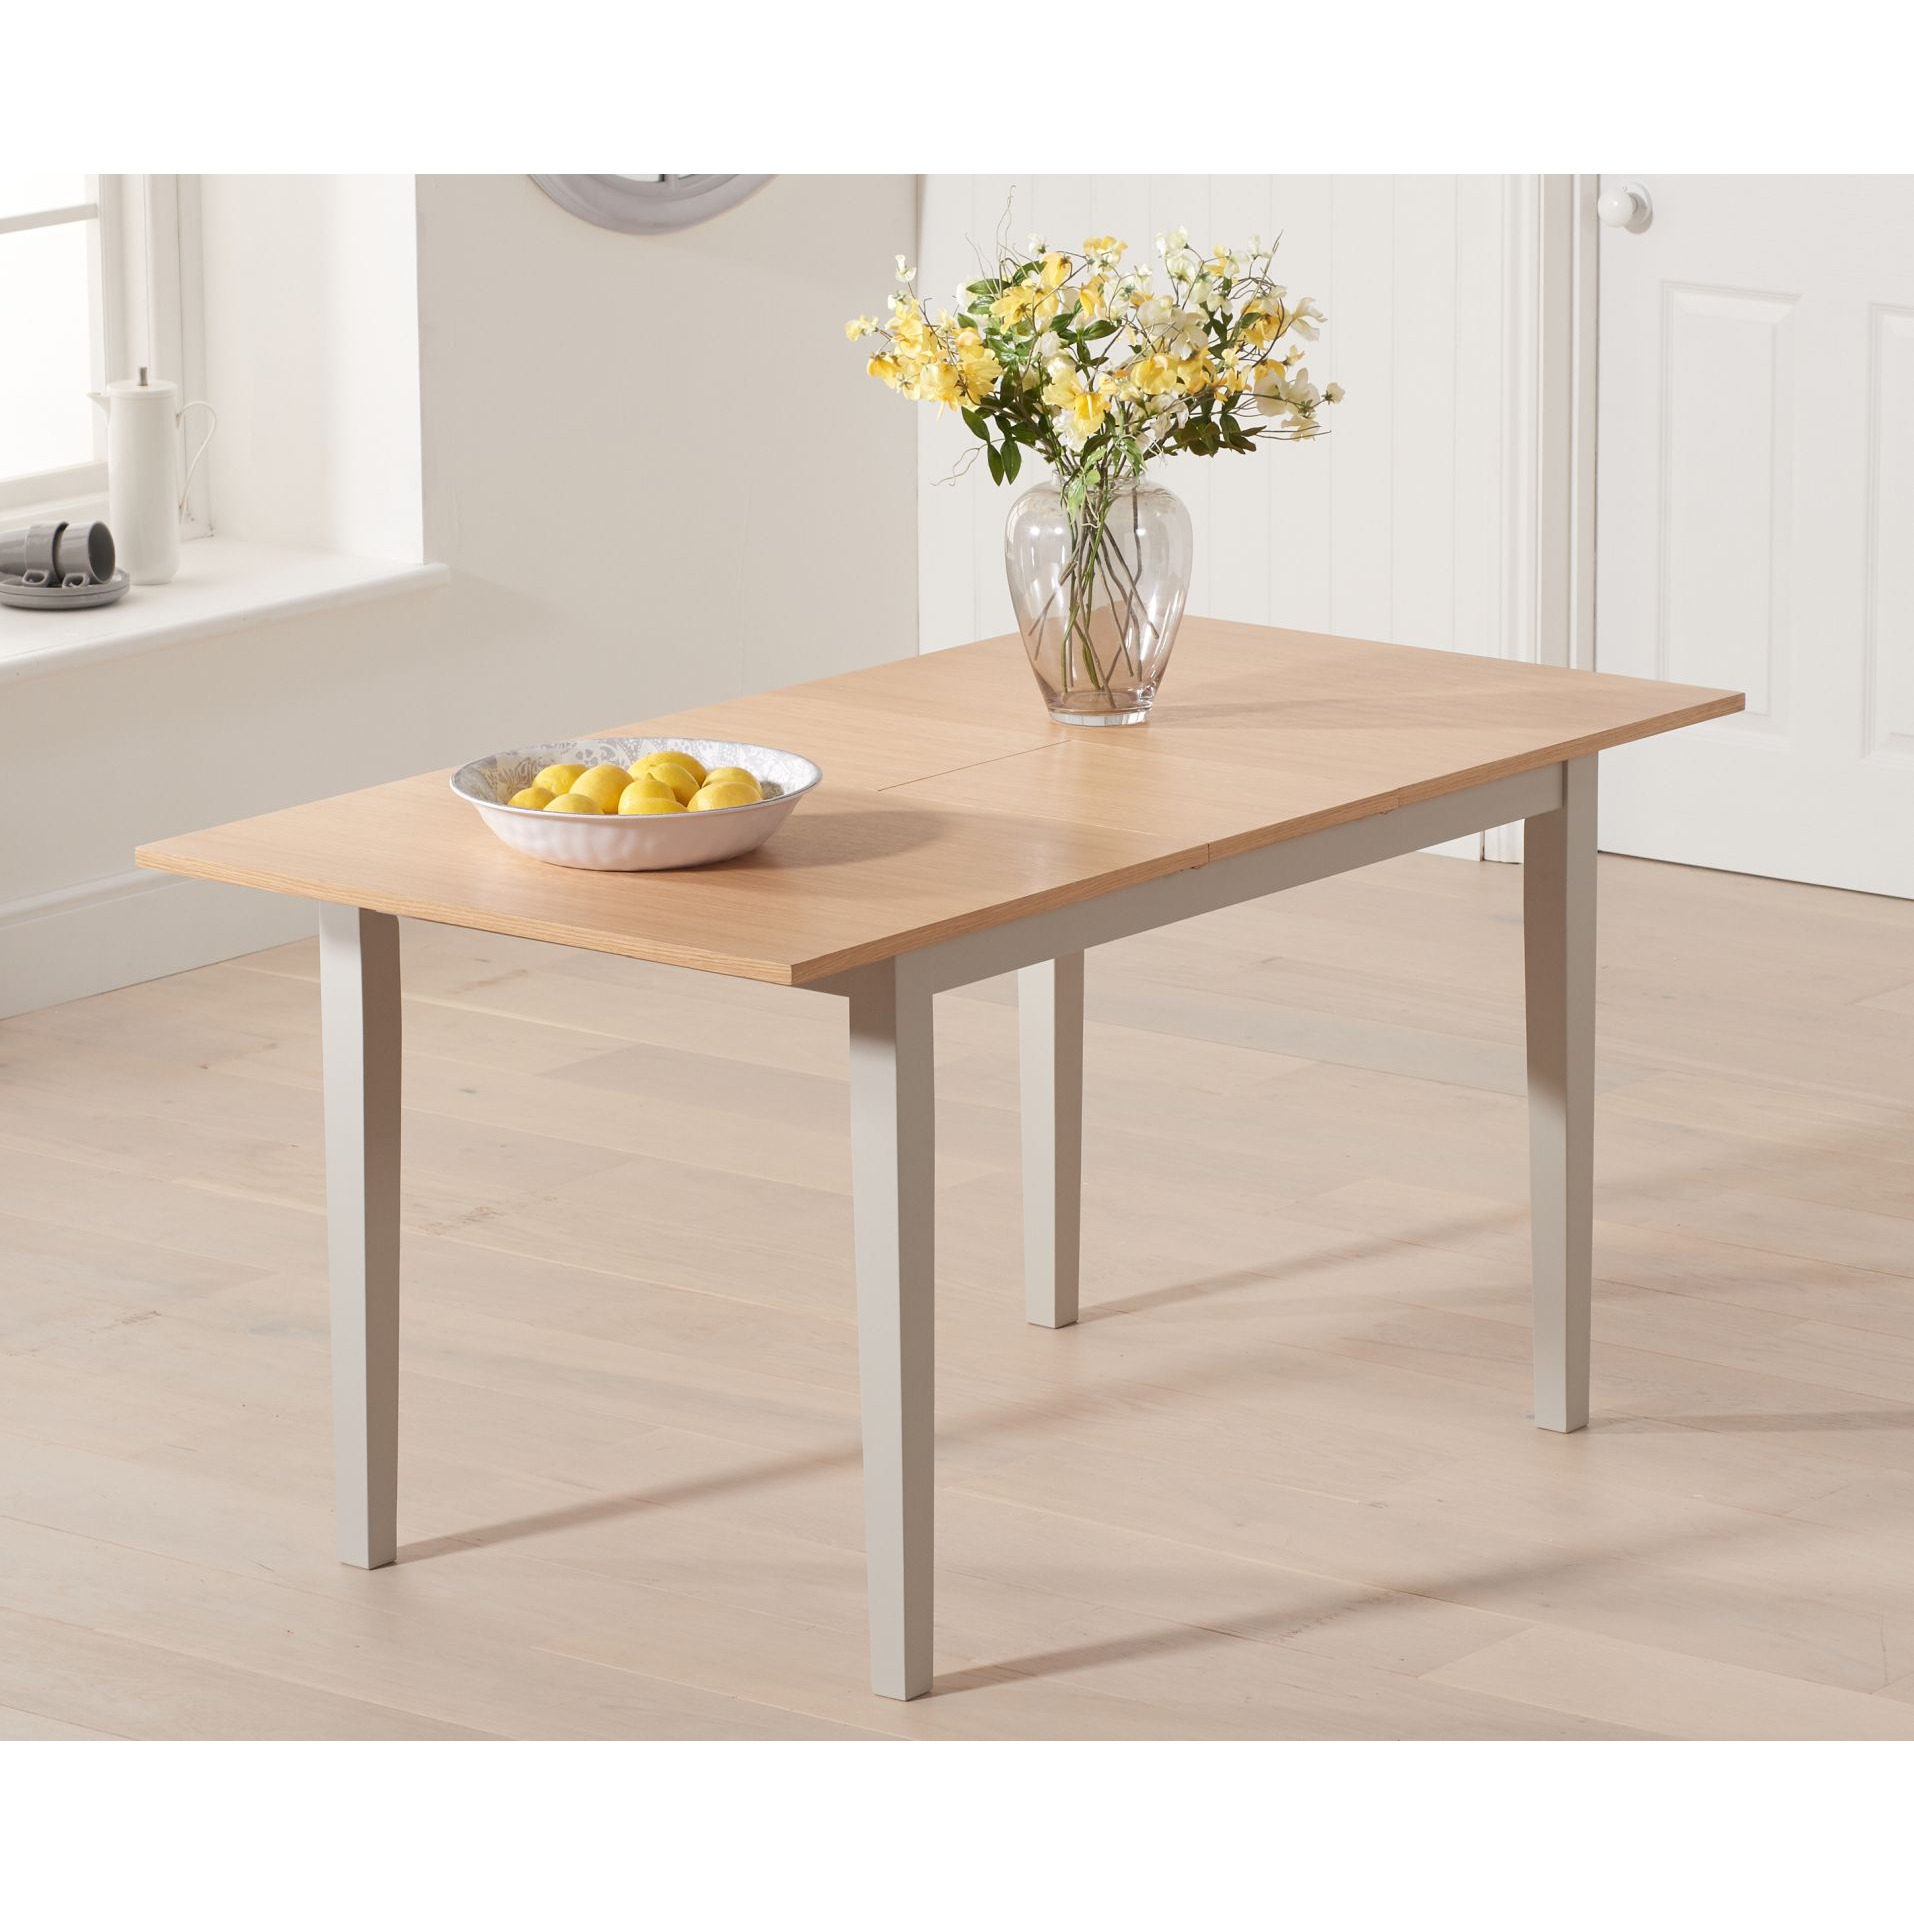 Chiltern 120cm Oak and Grey Extending Dining Table